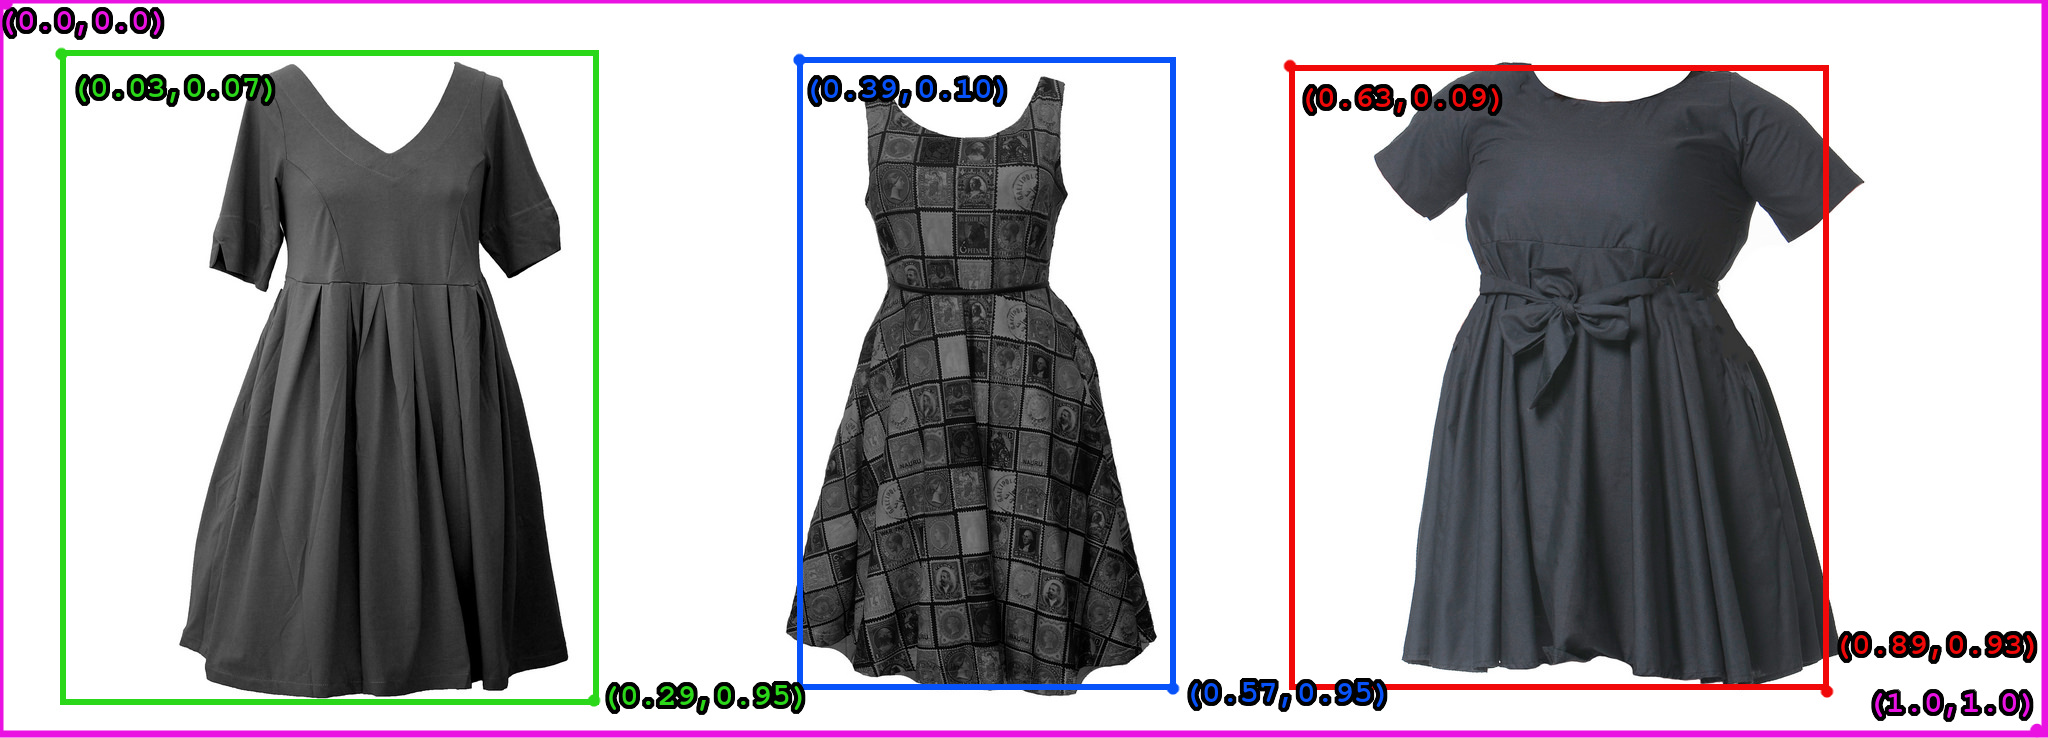 image with 3 dresses in cloud storage bucket